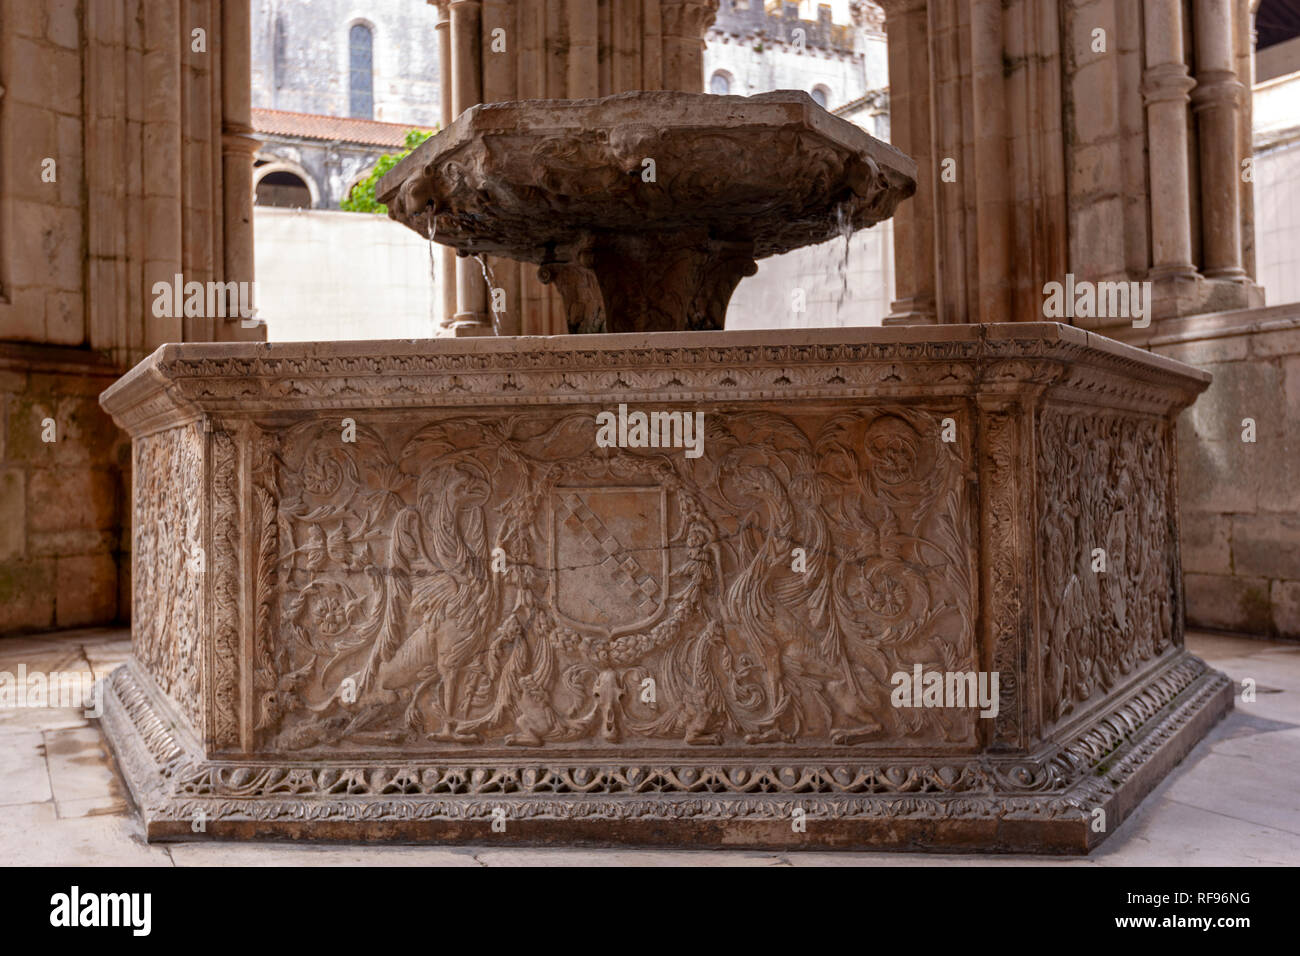 Renaissance water basin within the Gothic fountain house in the cloister of the Monastery of Alcobaça, Portugal Stock Photo